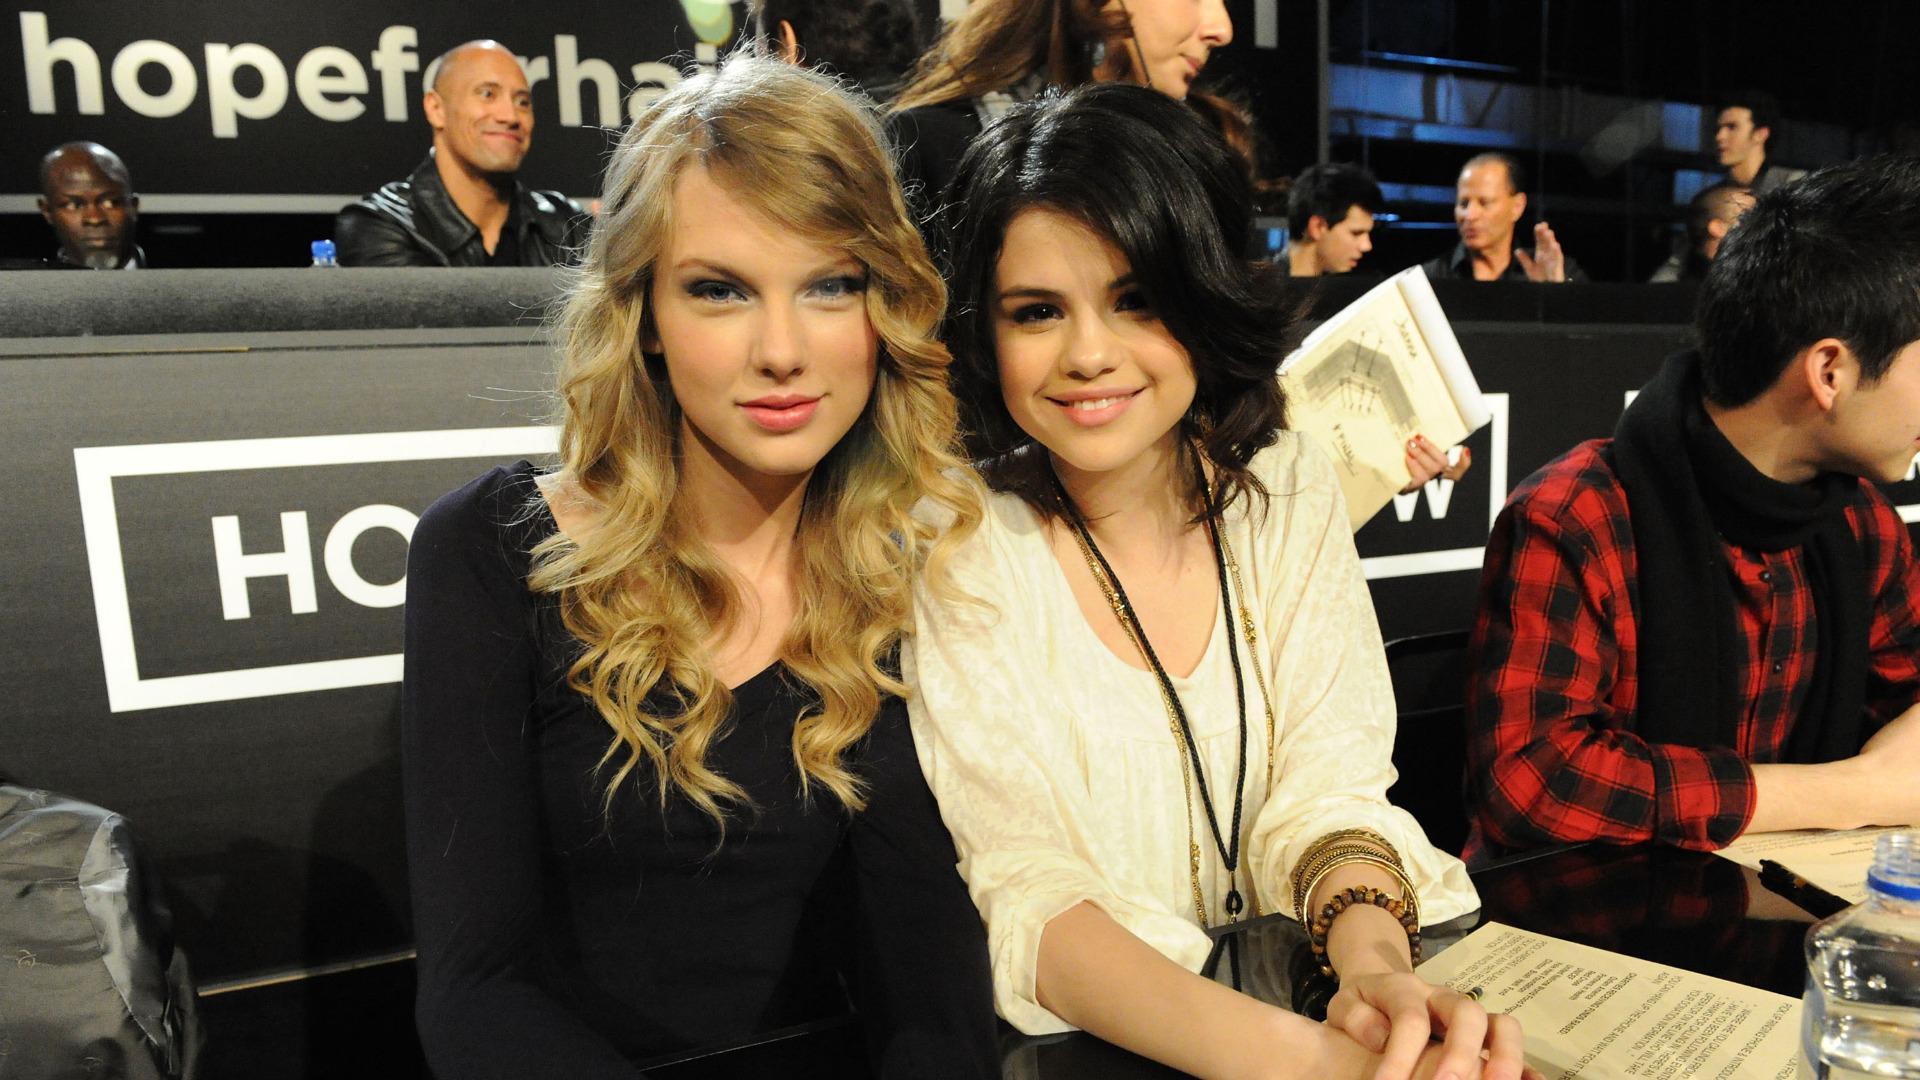 Taylor Swift wants Selena Gomez to find some smarter friends